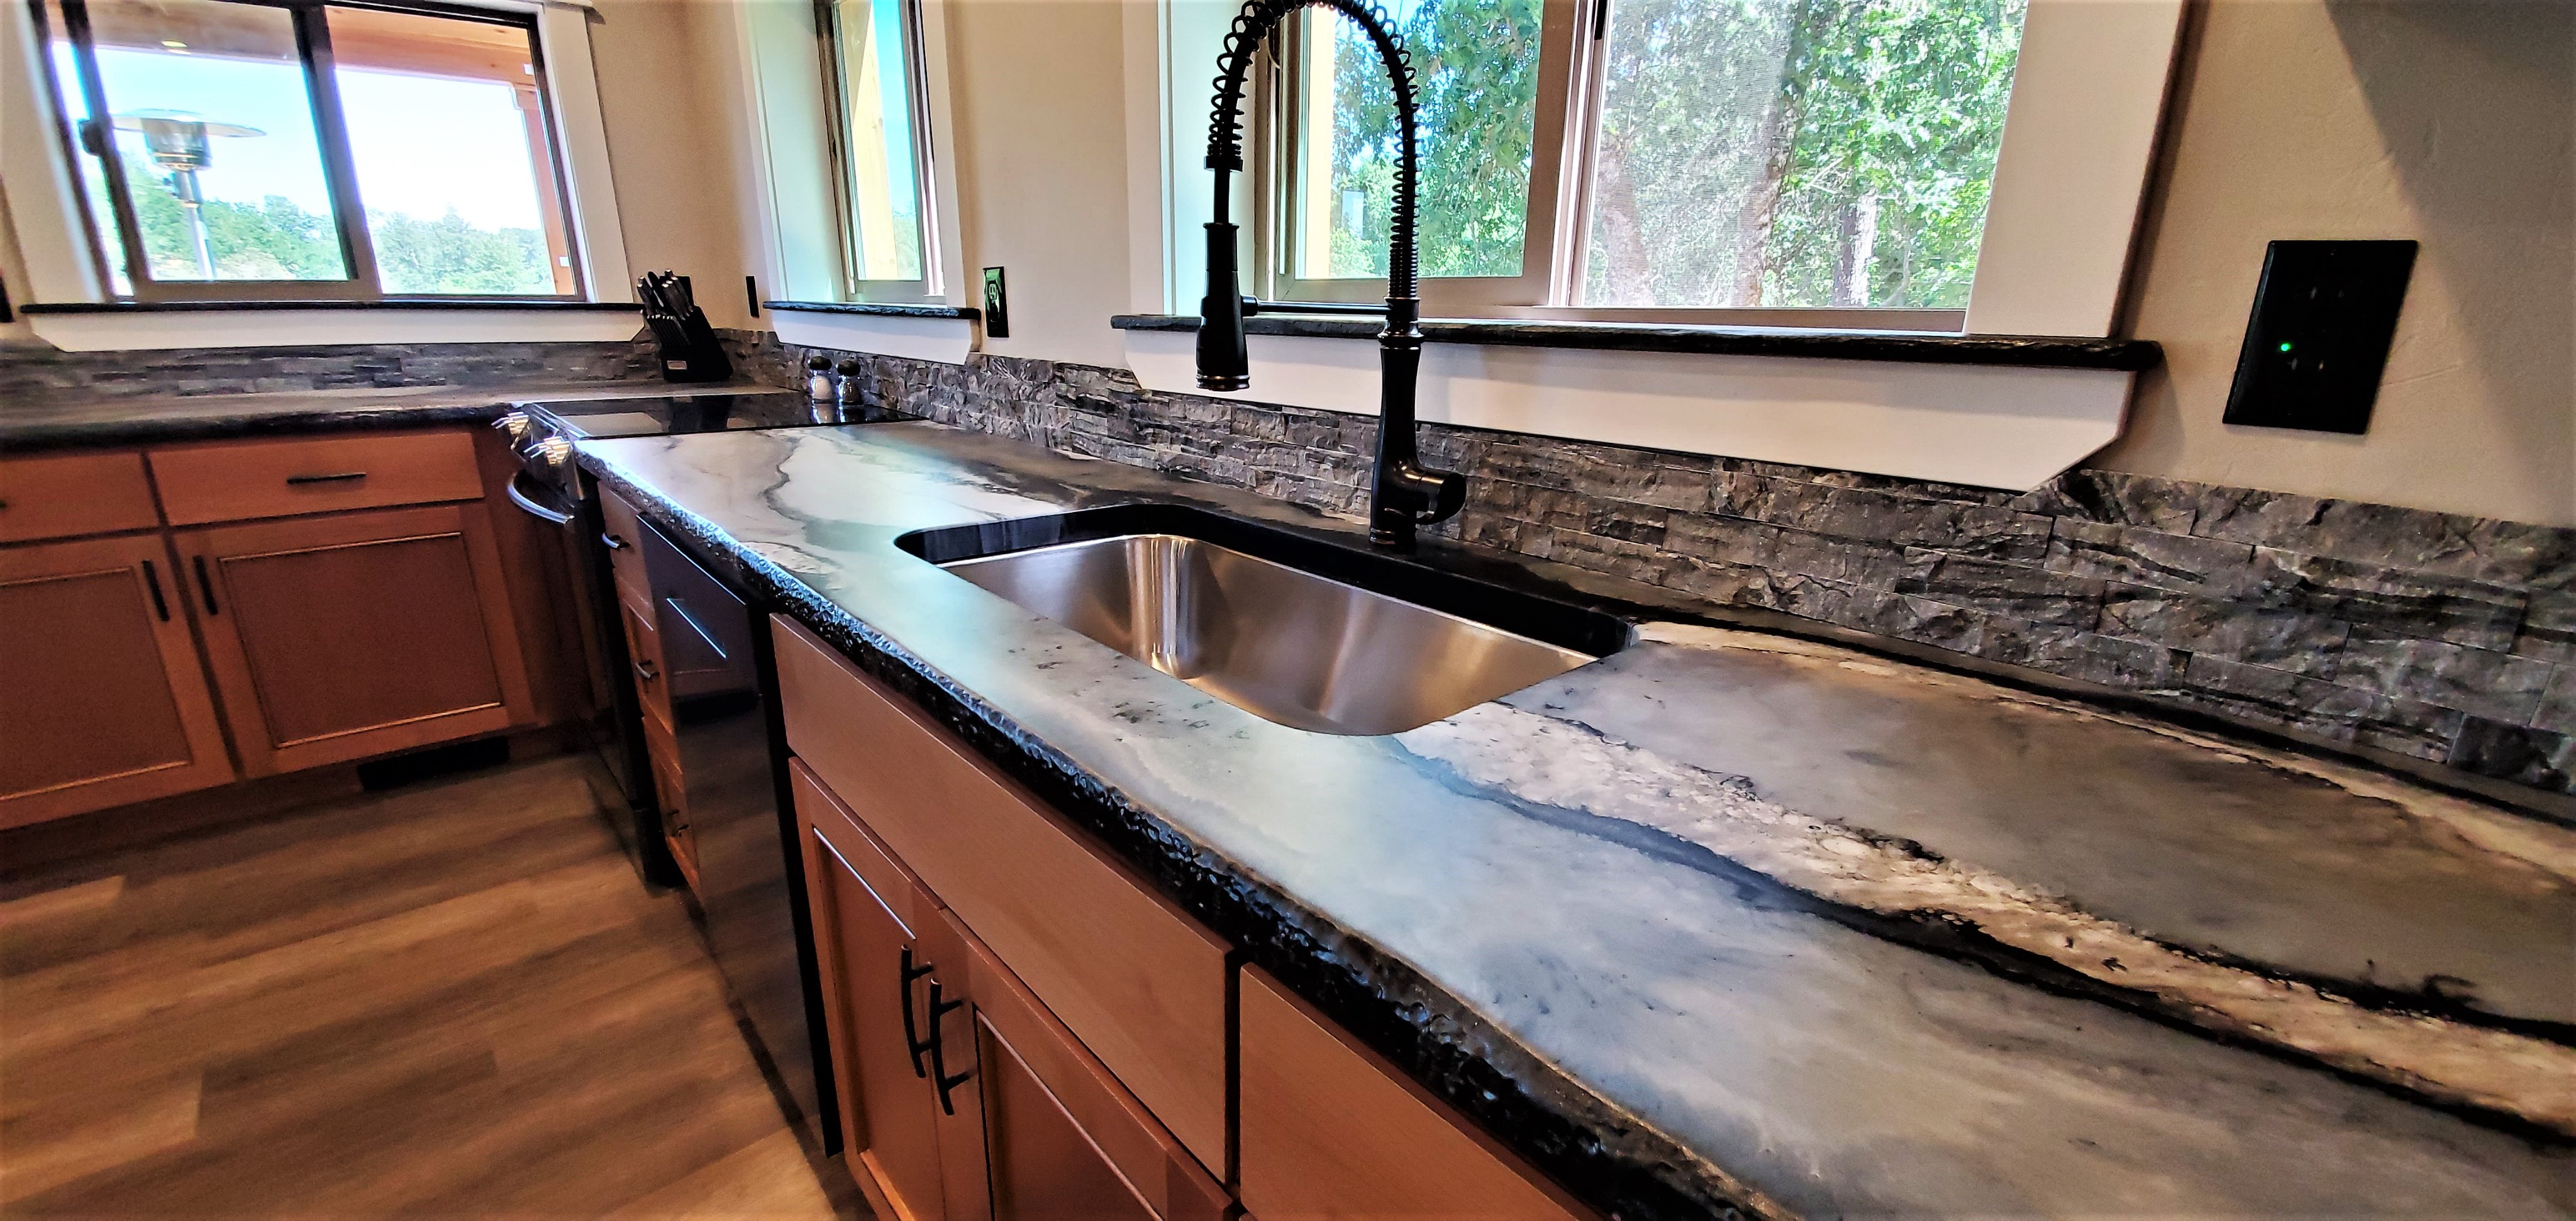 The possibilities are endless! - Stone Coat Countertops